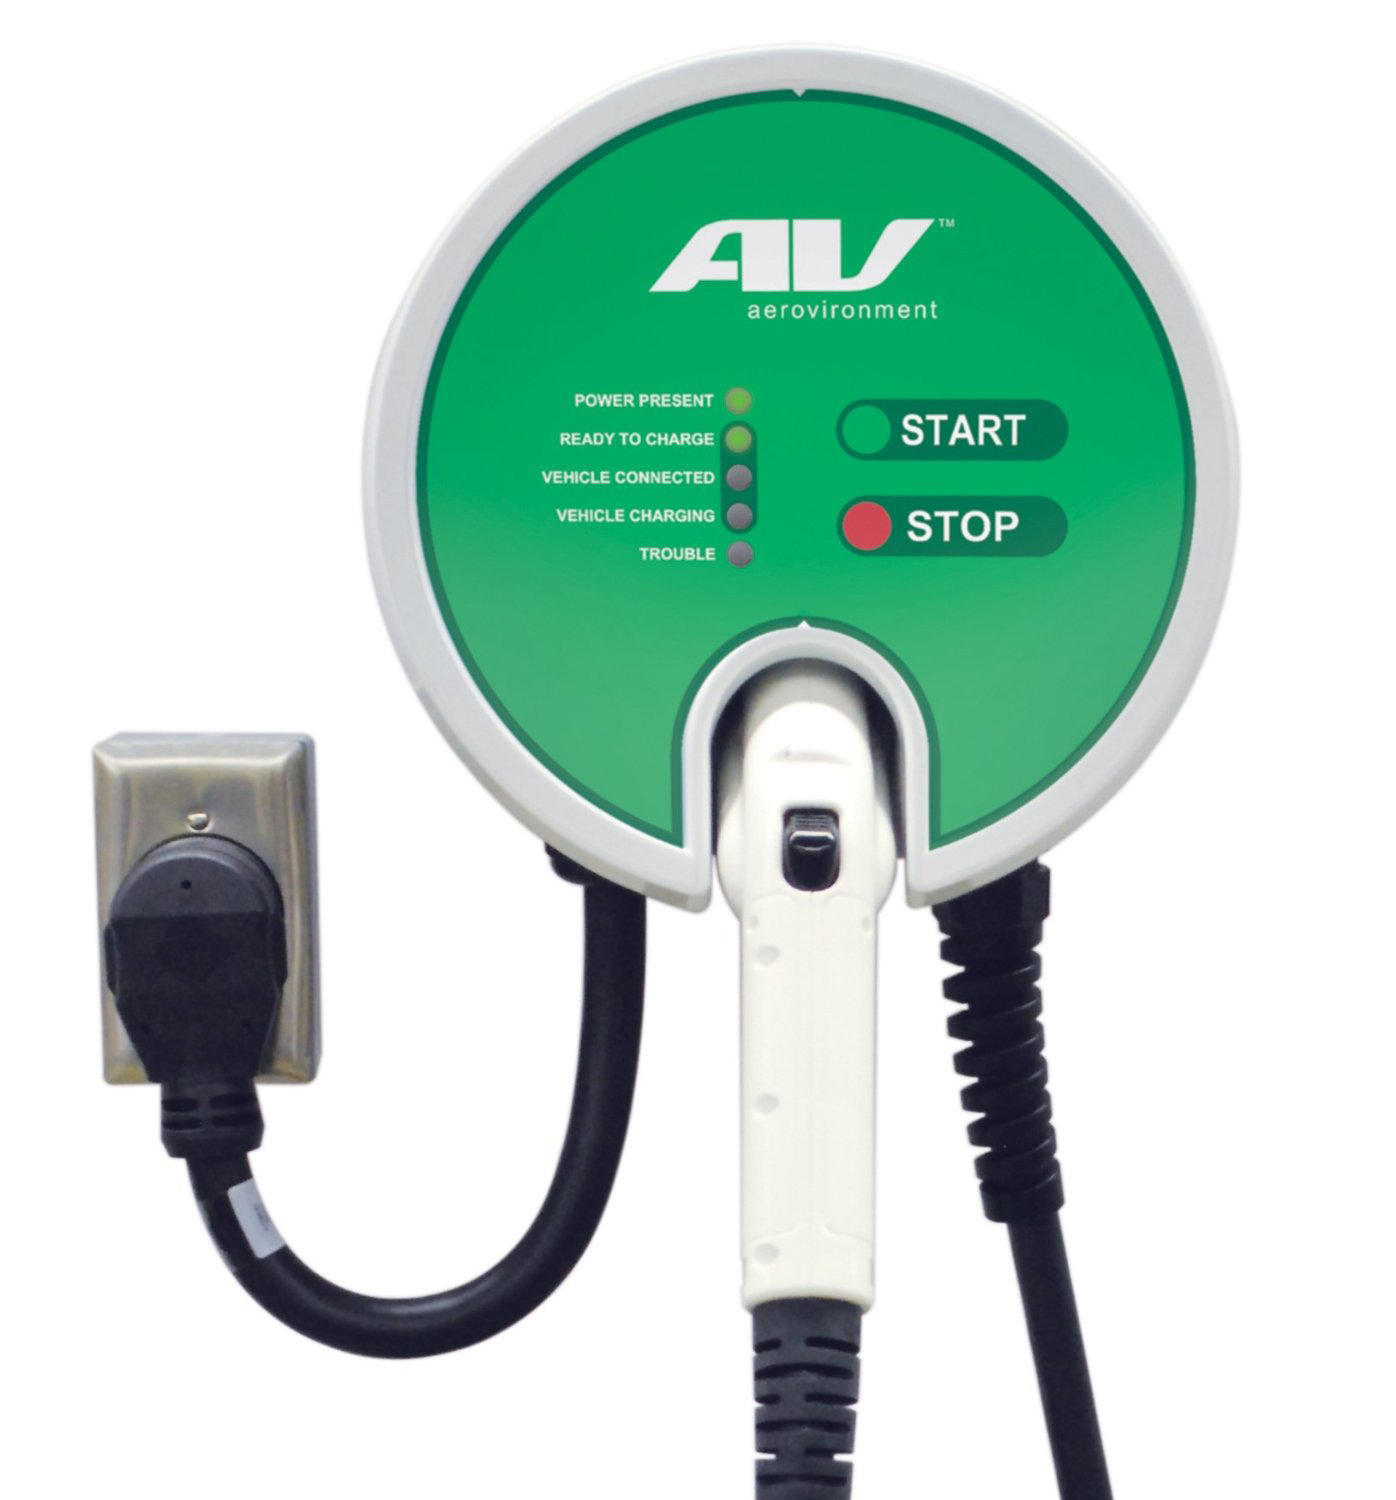 How to buy an electriccar charging station buyer's guide to EVSEs